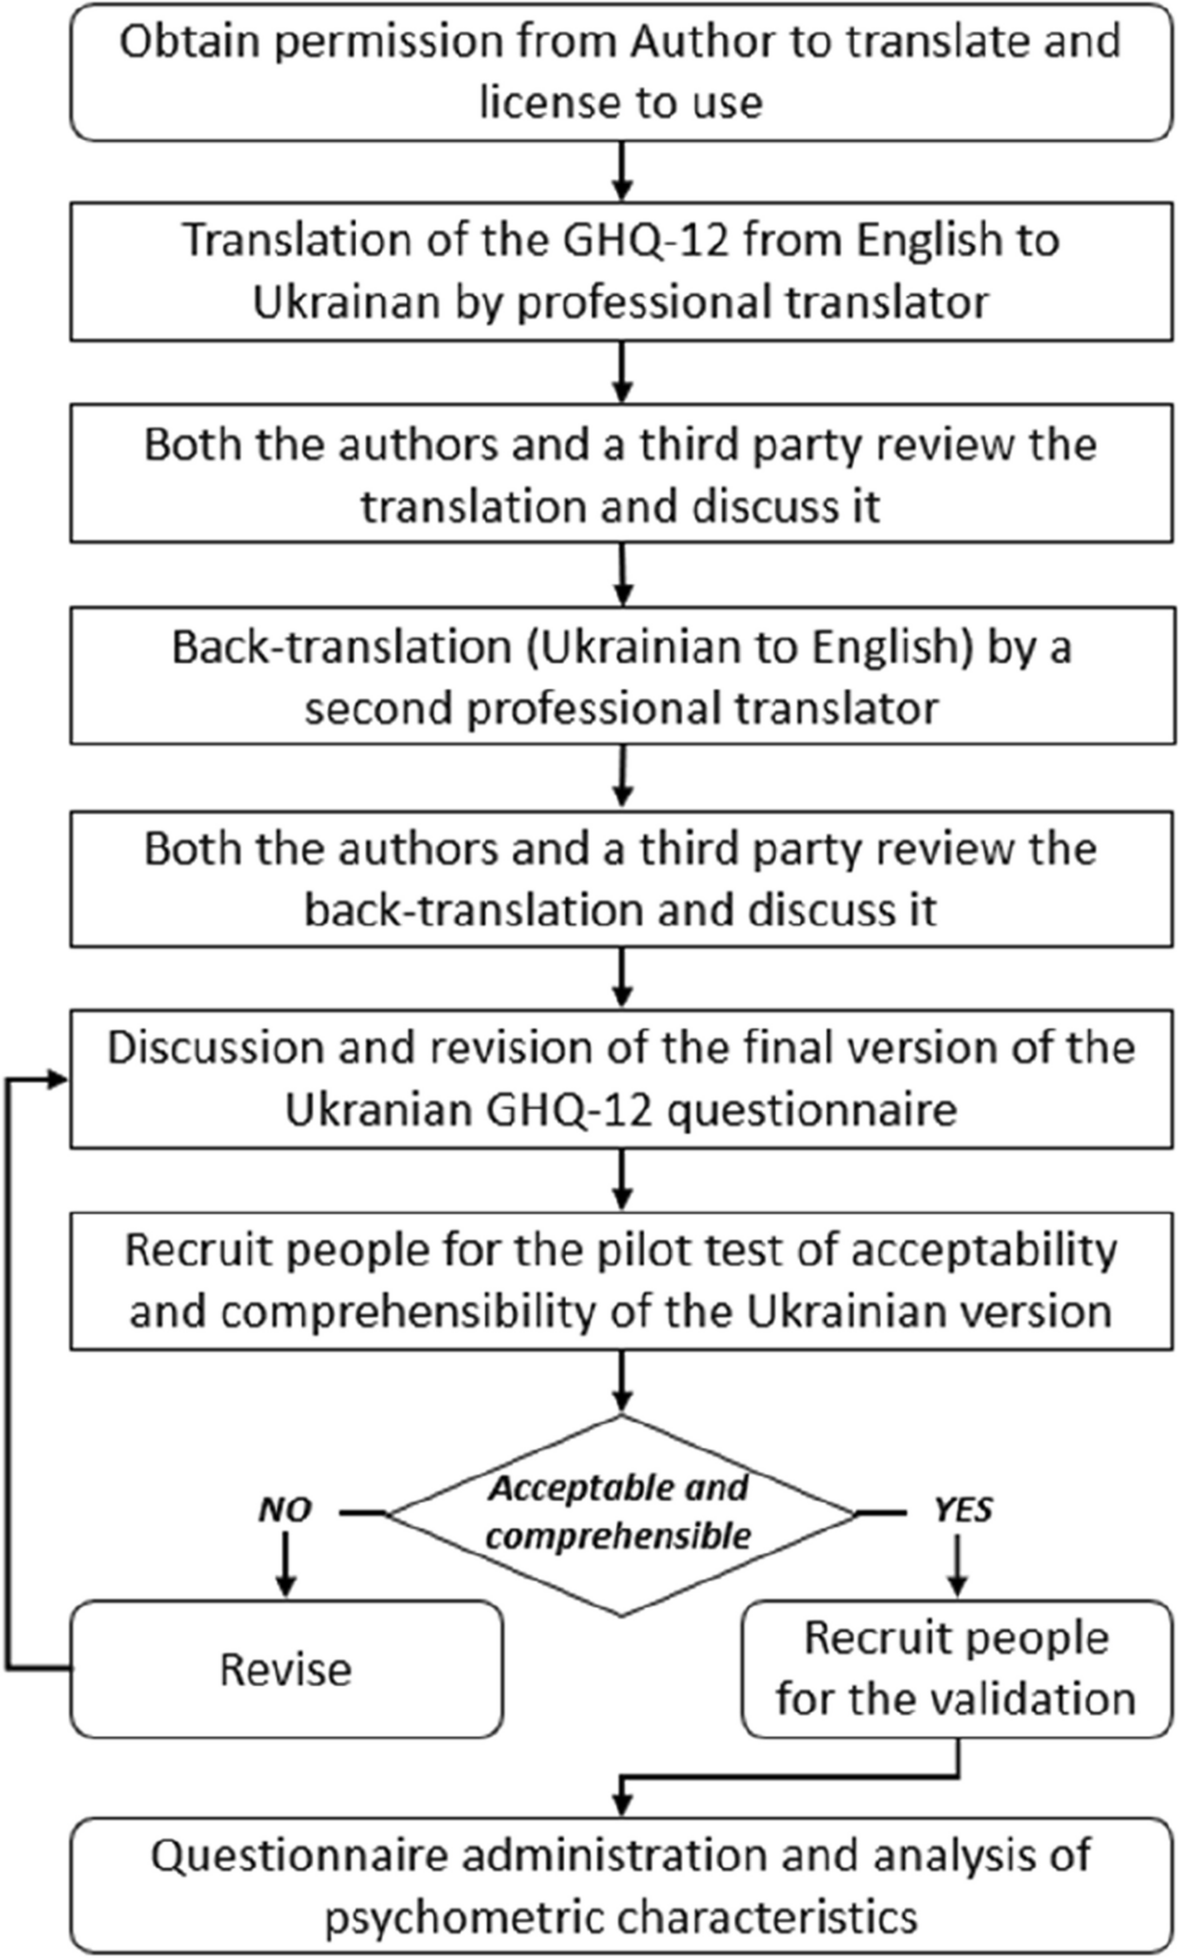 The use of 12-item General Health Questionnaire (GHQ-12) in Ukrainian refugees: translation and validation study of the Ukrainian version